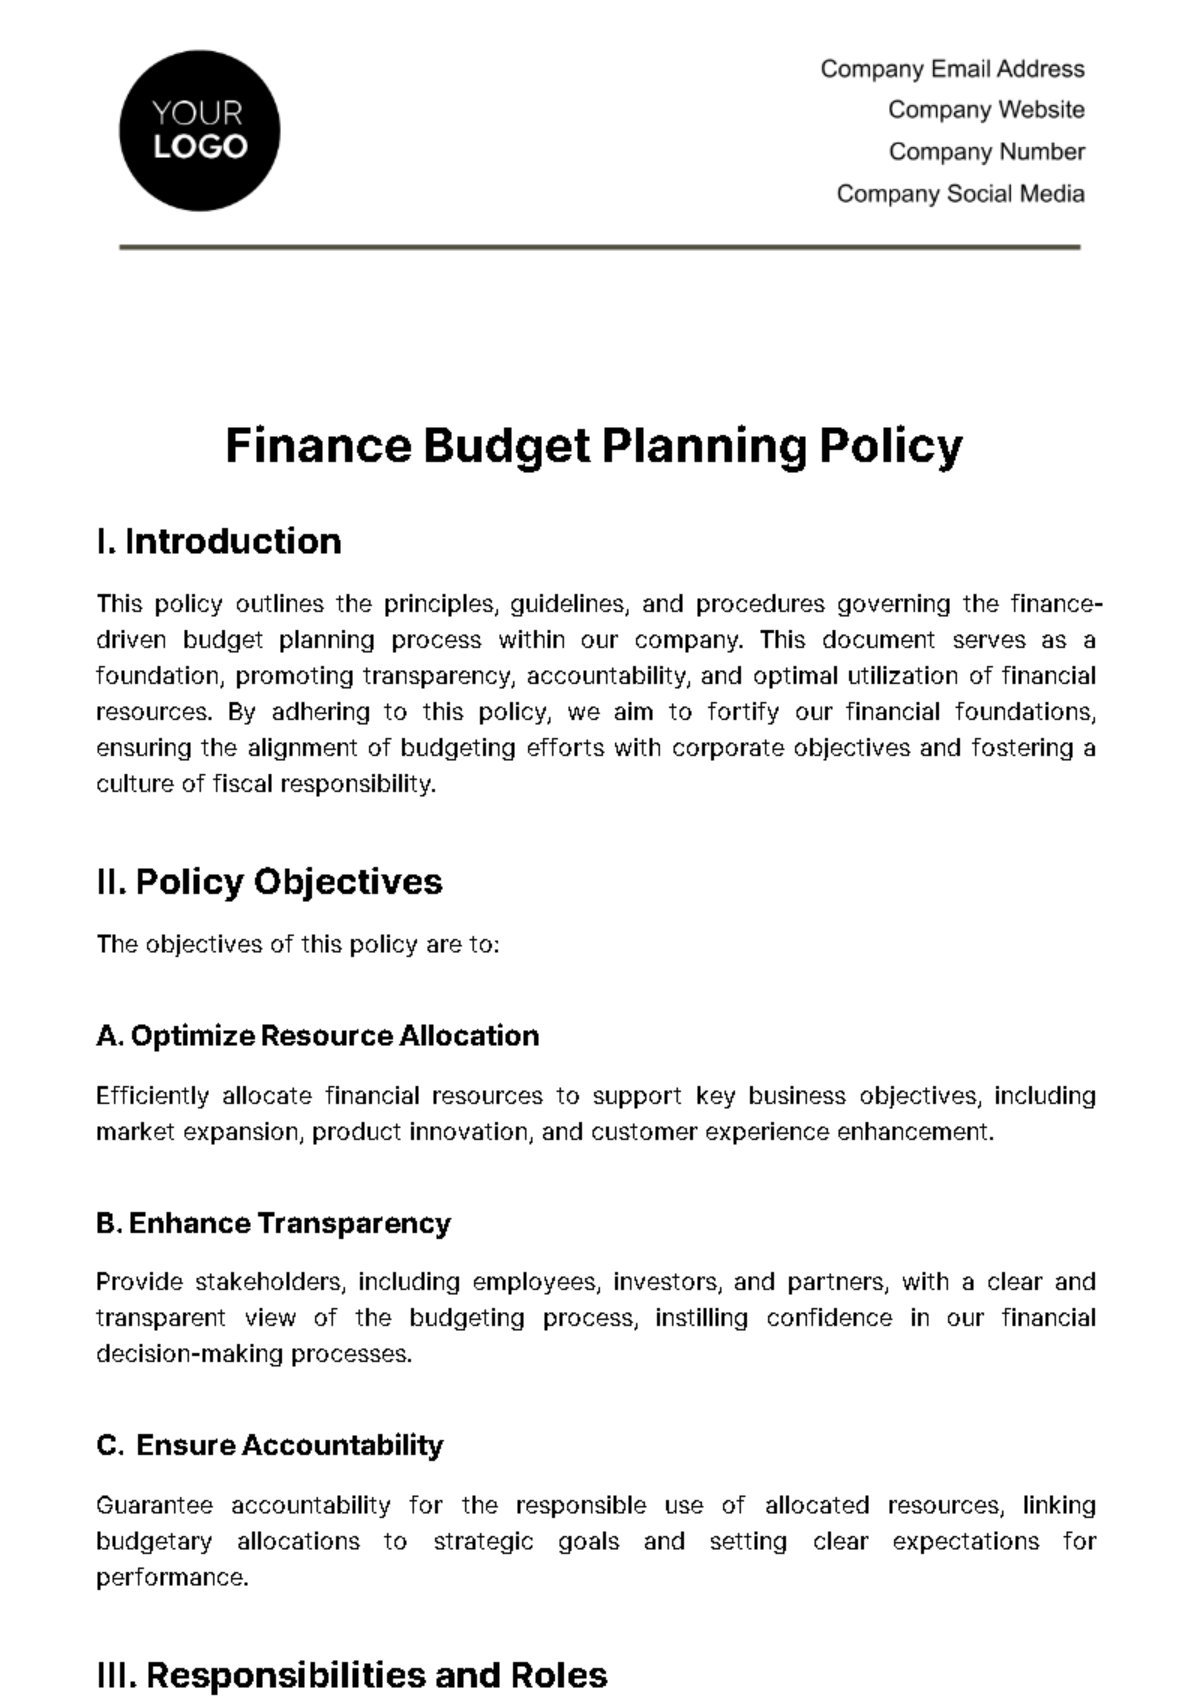 Finance Budget Planning Policy Template